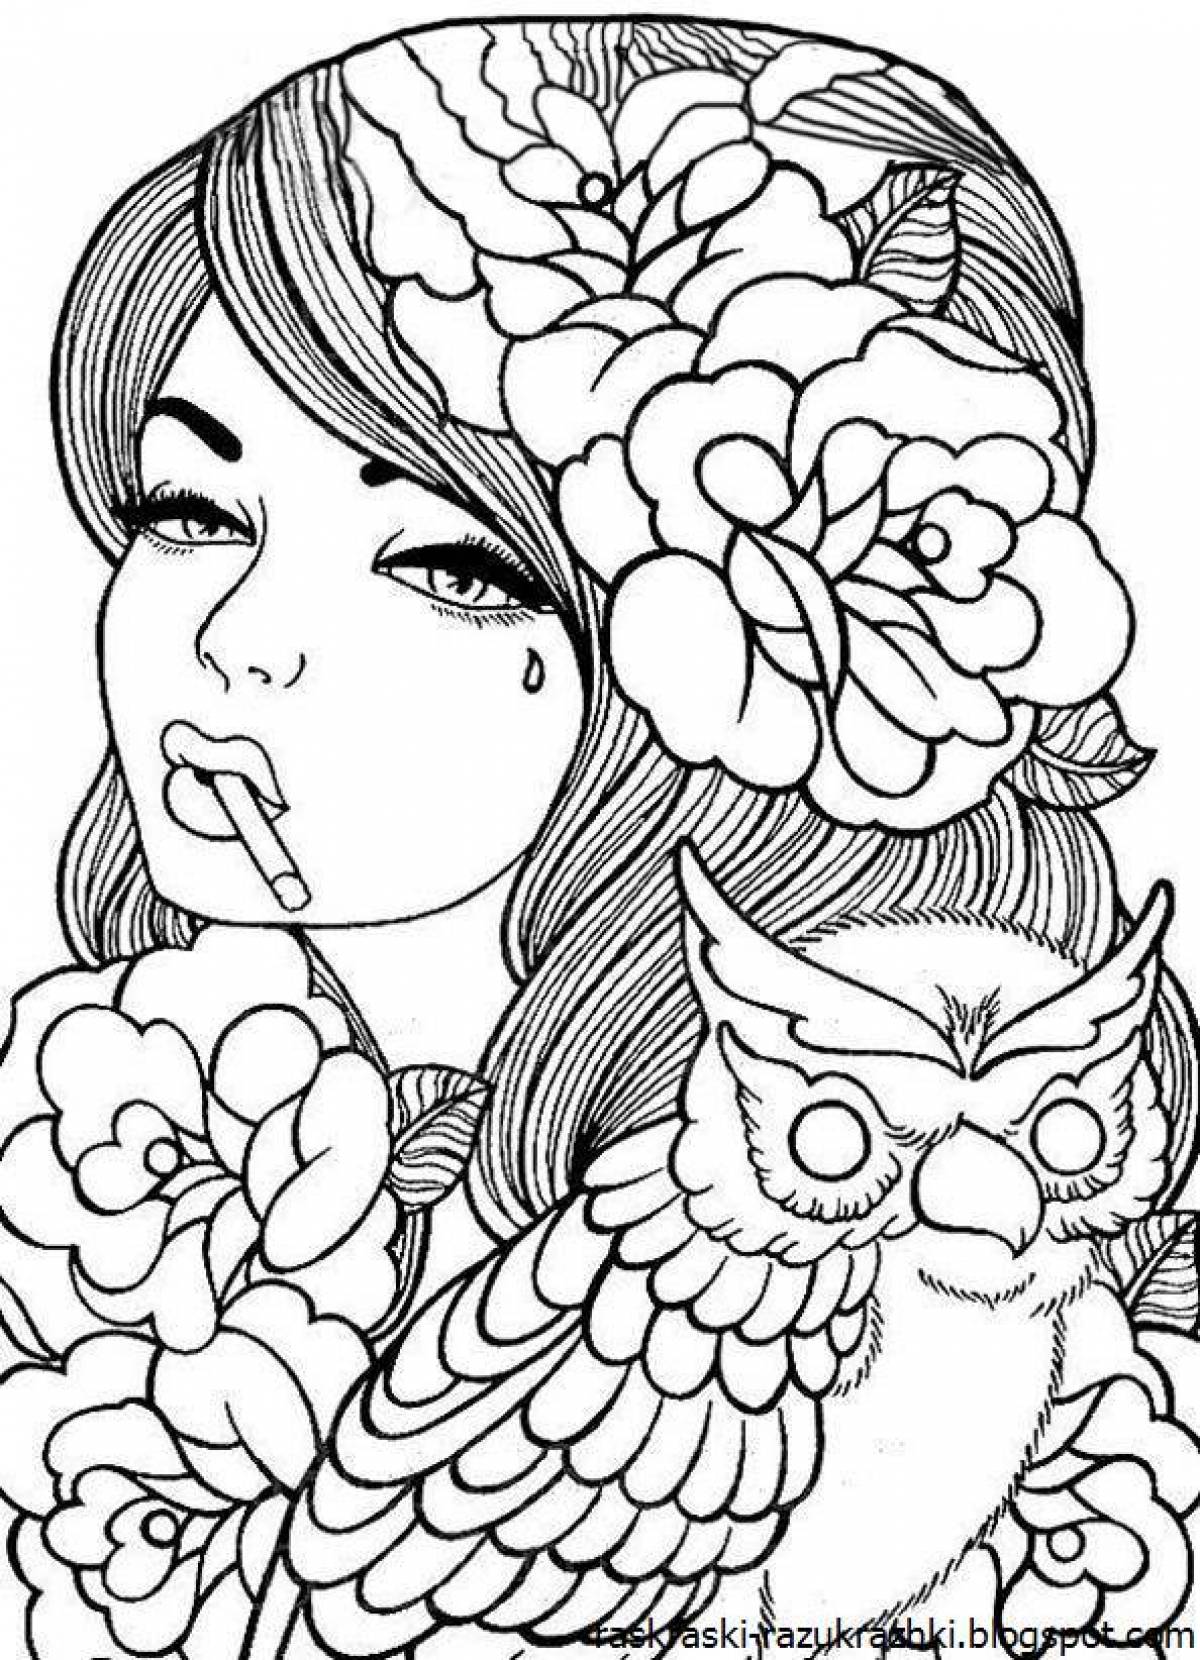 Amazing coloring book for girls 12 years old